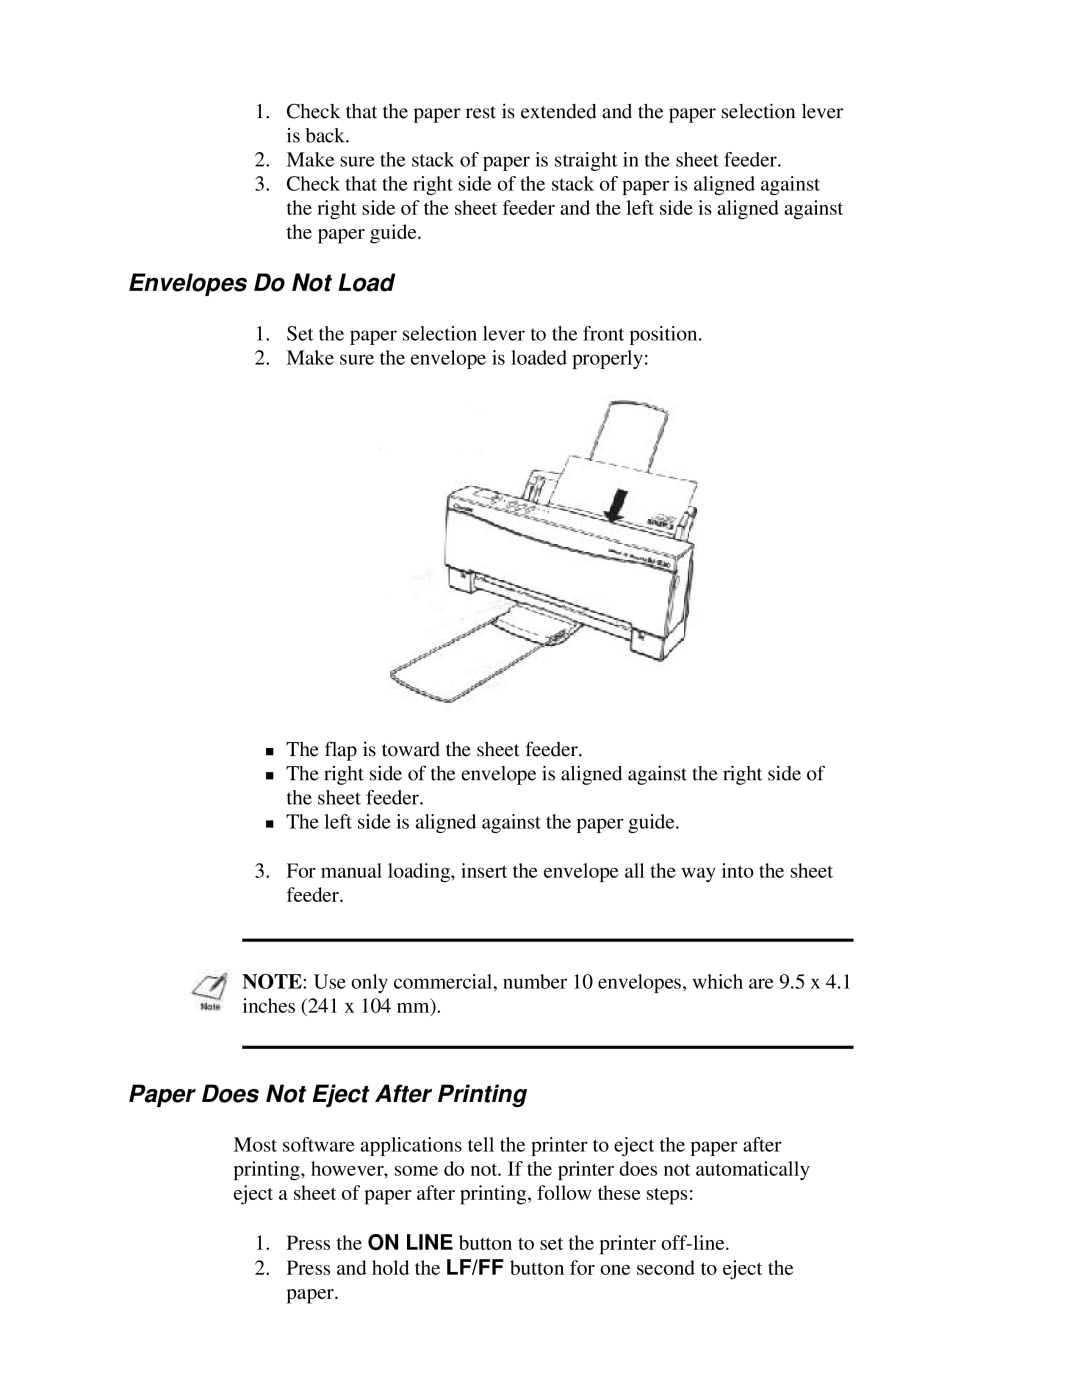 Canon BJ-230 user manual Envelopes Do Not Load, Paper Does Not Eject After Printing 